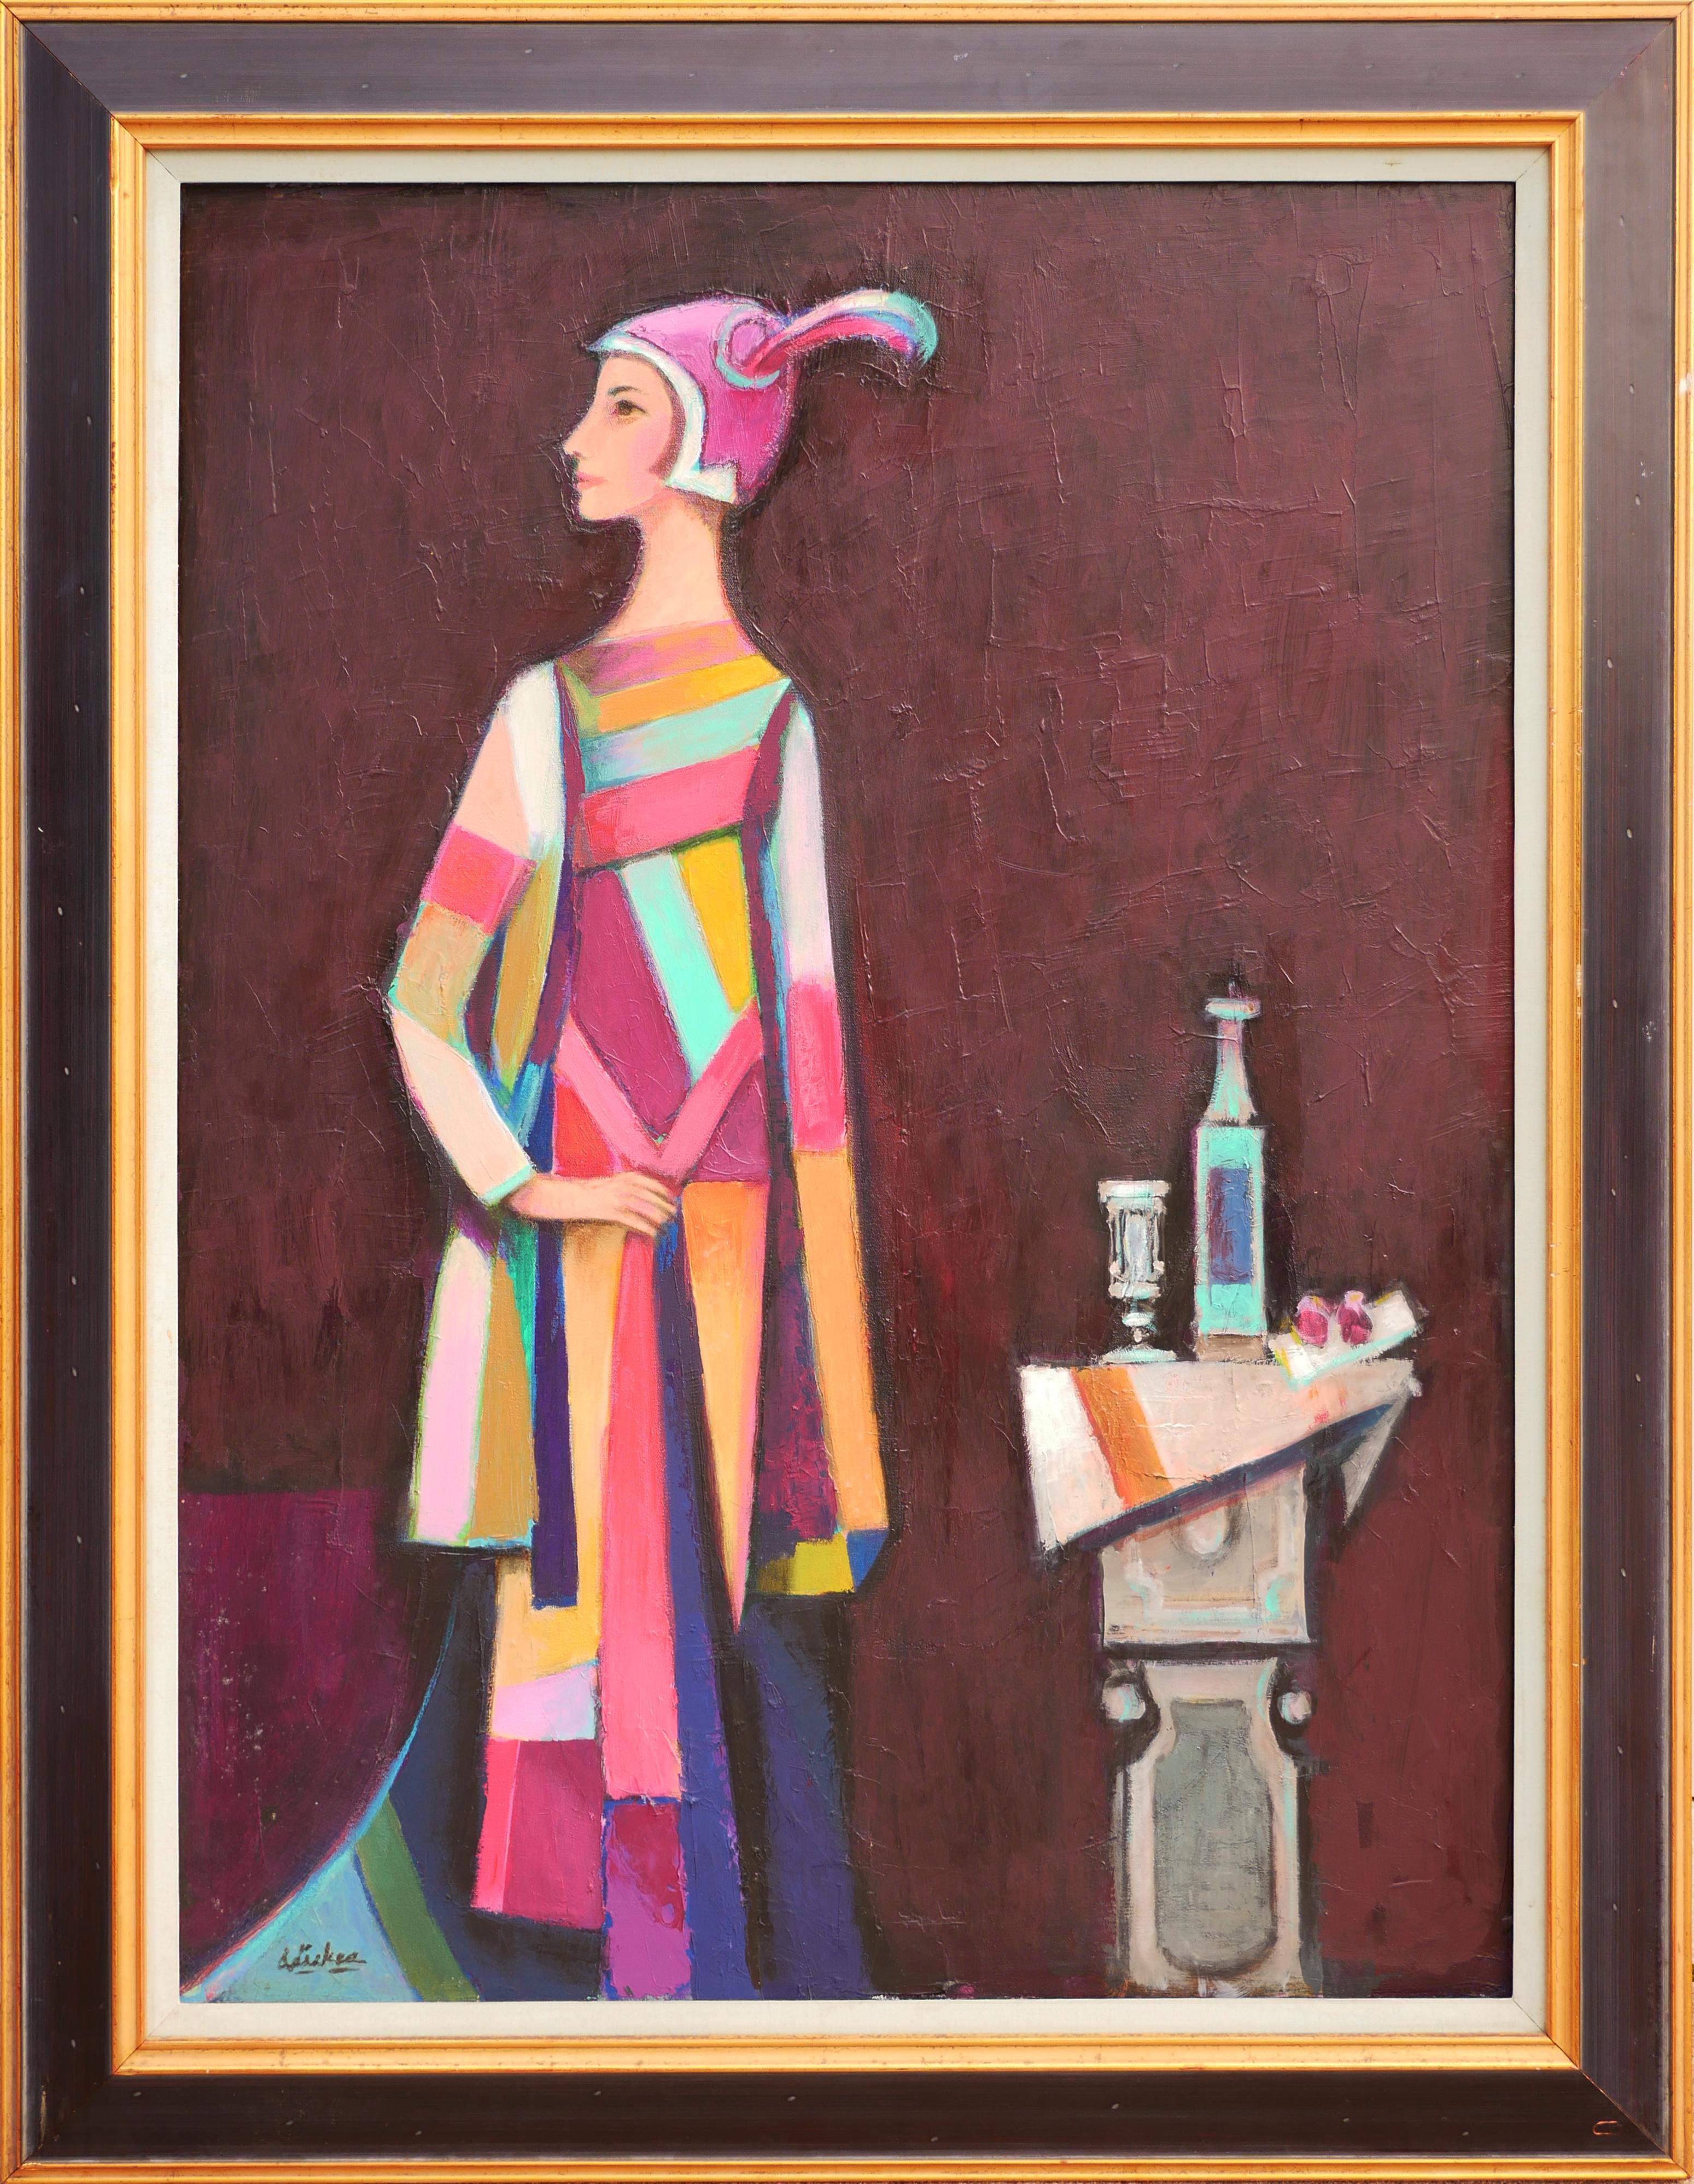 David Adickes Figurative Painting - "Dress of Many Colors with Still Life" Modern Abstract Female Portrait Painting 